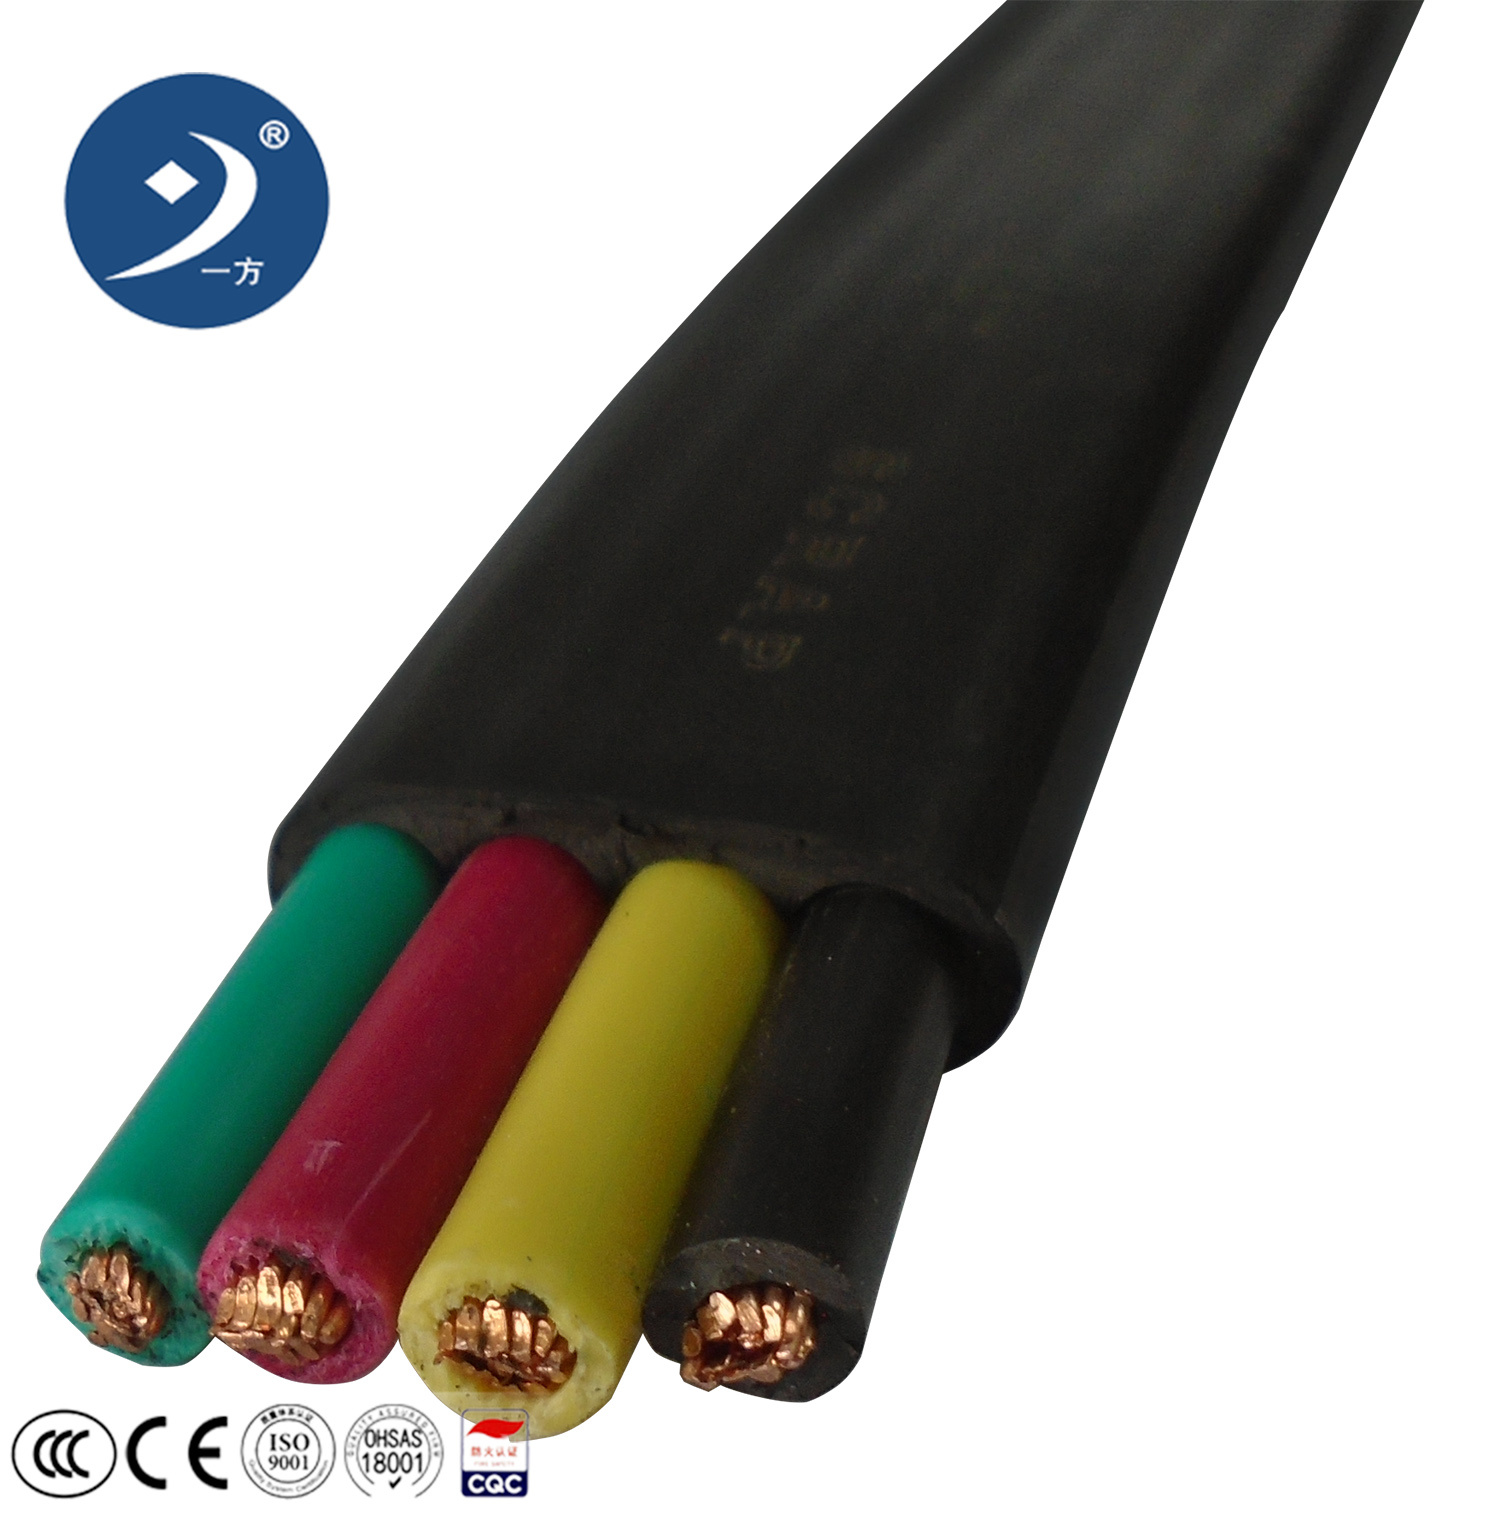 
                4 Core Flexsible Electrical Cable and Wire Flat 2.5mm 300V Elevator Travel Cable Lift Cable
            